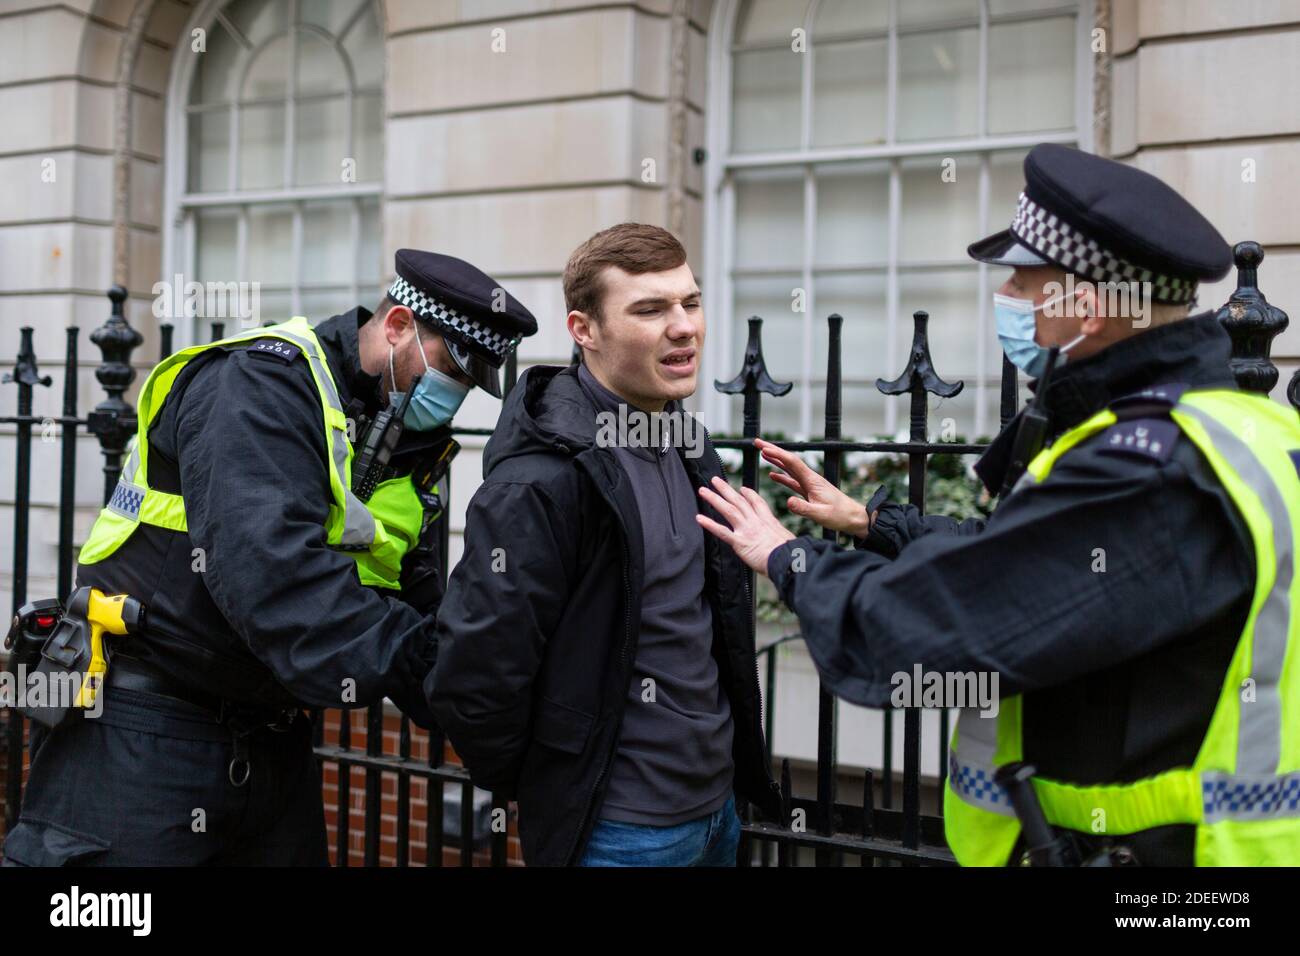 Anti-lockdown protest, London, 28 November 2020. A young man is arrested by police officers on a sidewalk. Stock Photo